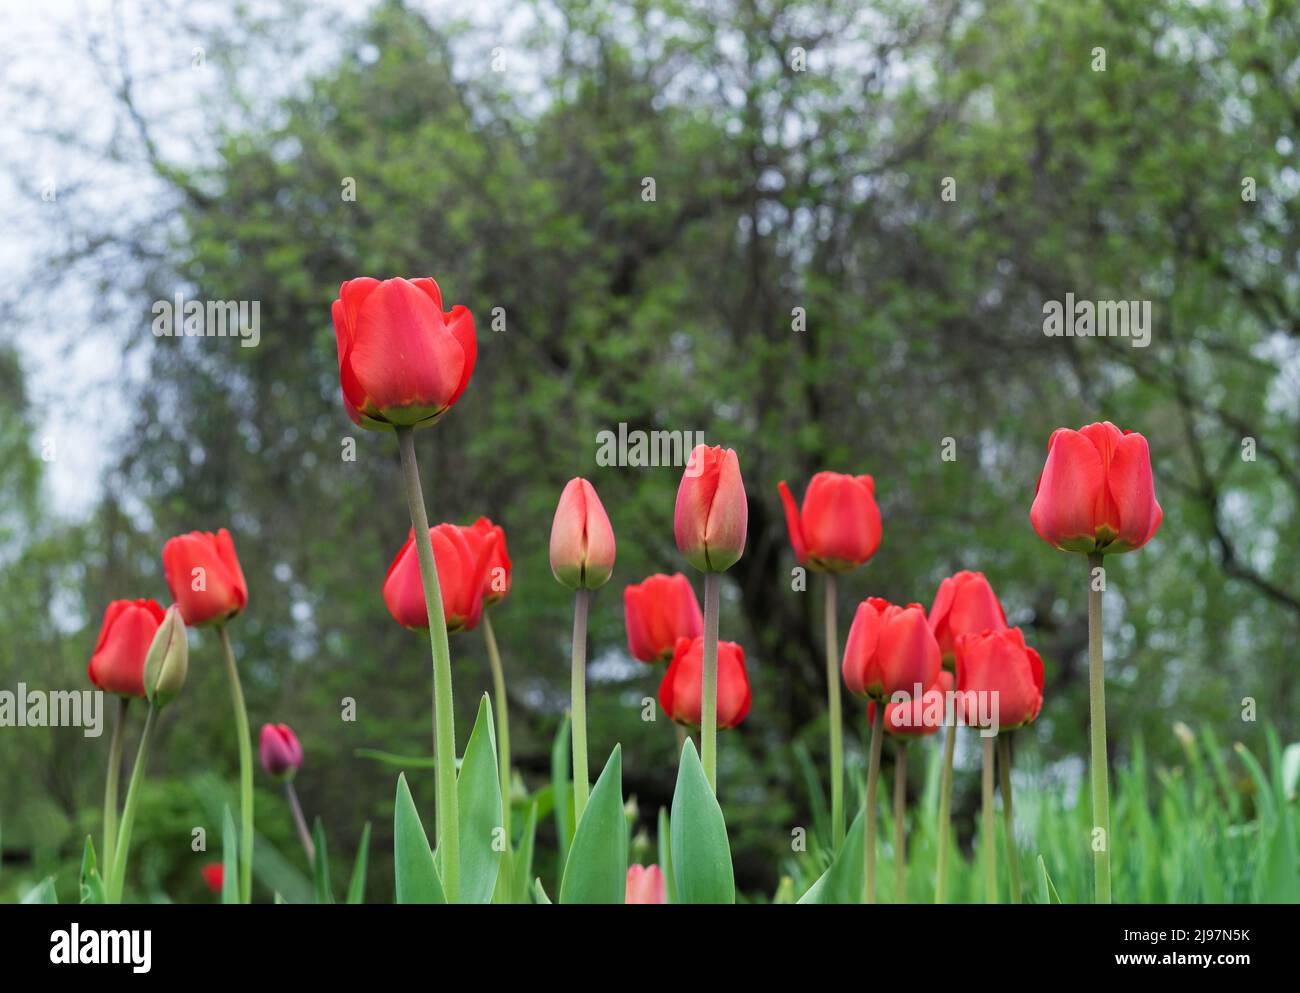 Red tulips on the background of trees with green foliage. Blooming tulips. First spring flowers. Stock Photo